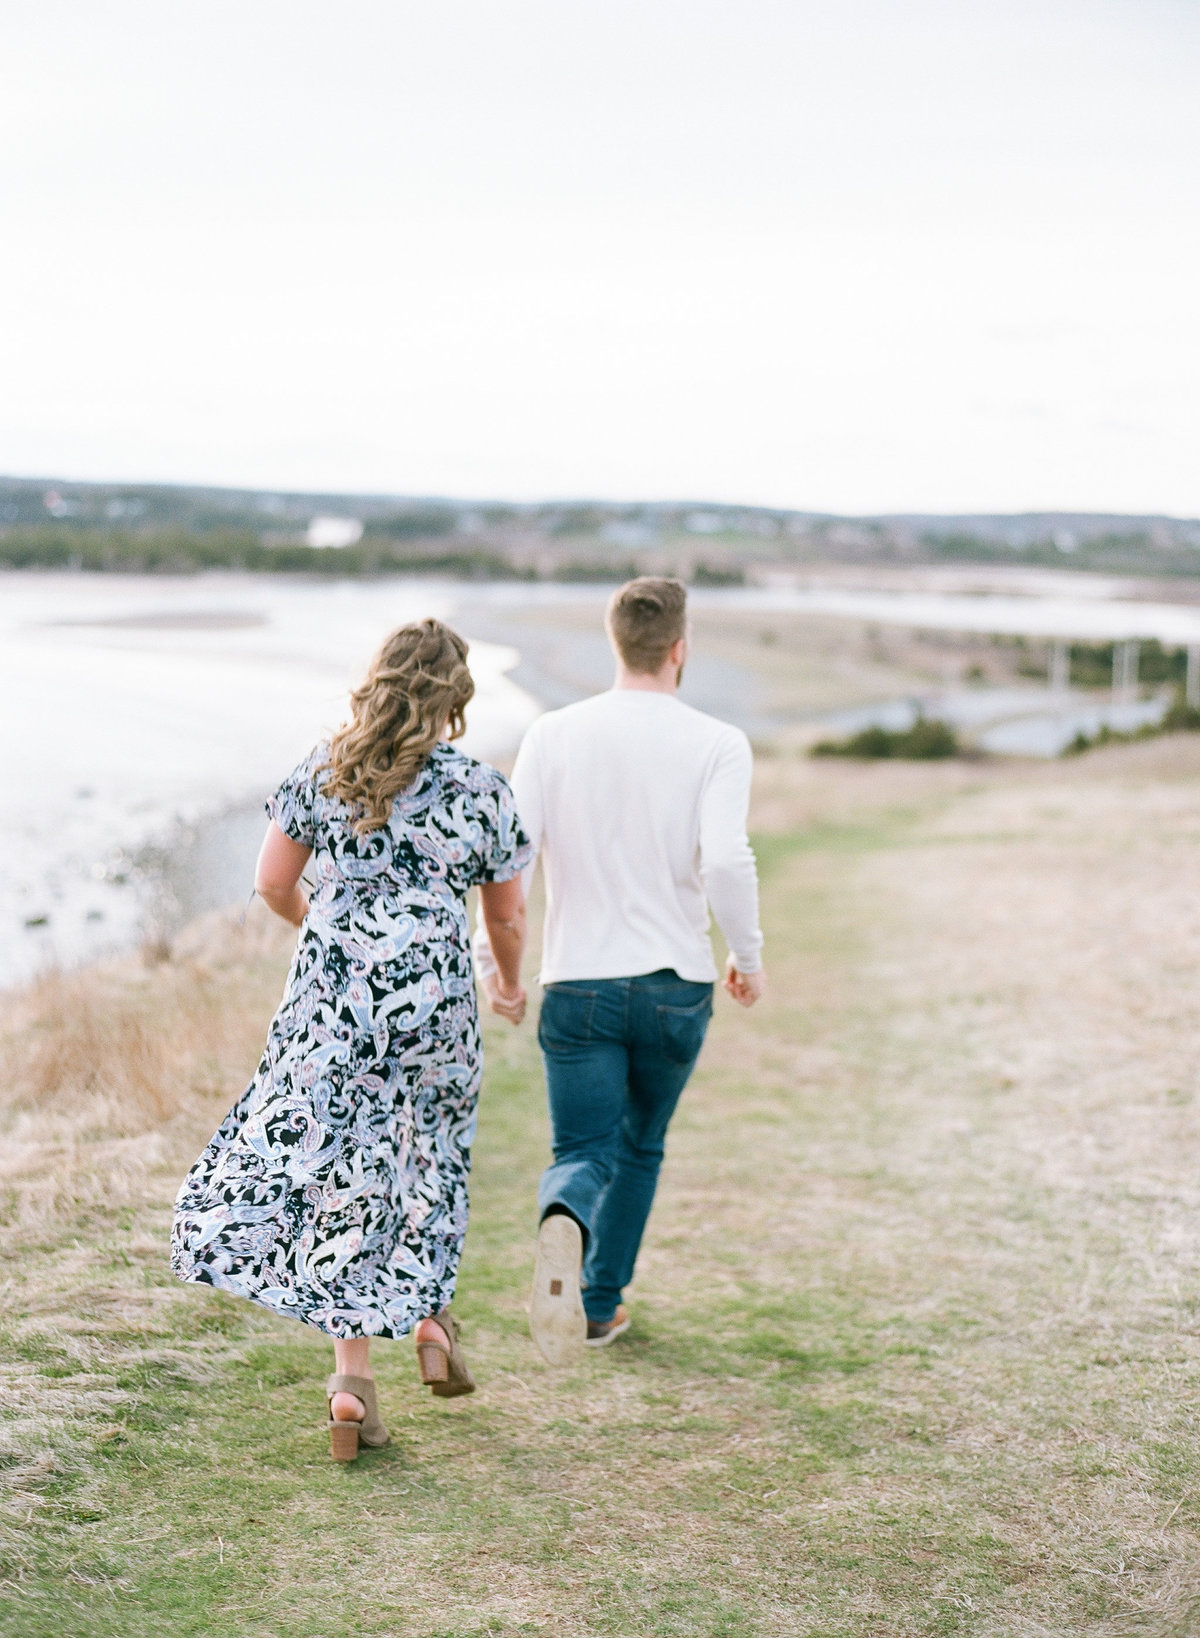 Jacqueline Anne Photography - Akayla and Andrew - Lawrencetown Beach-25